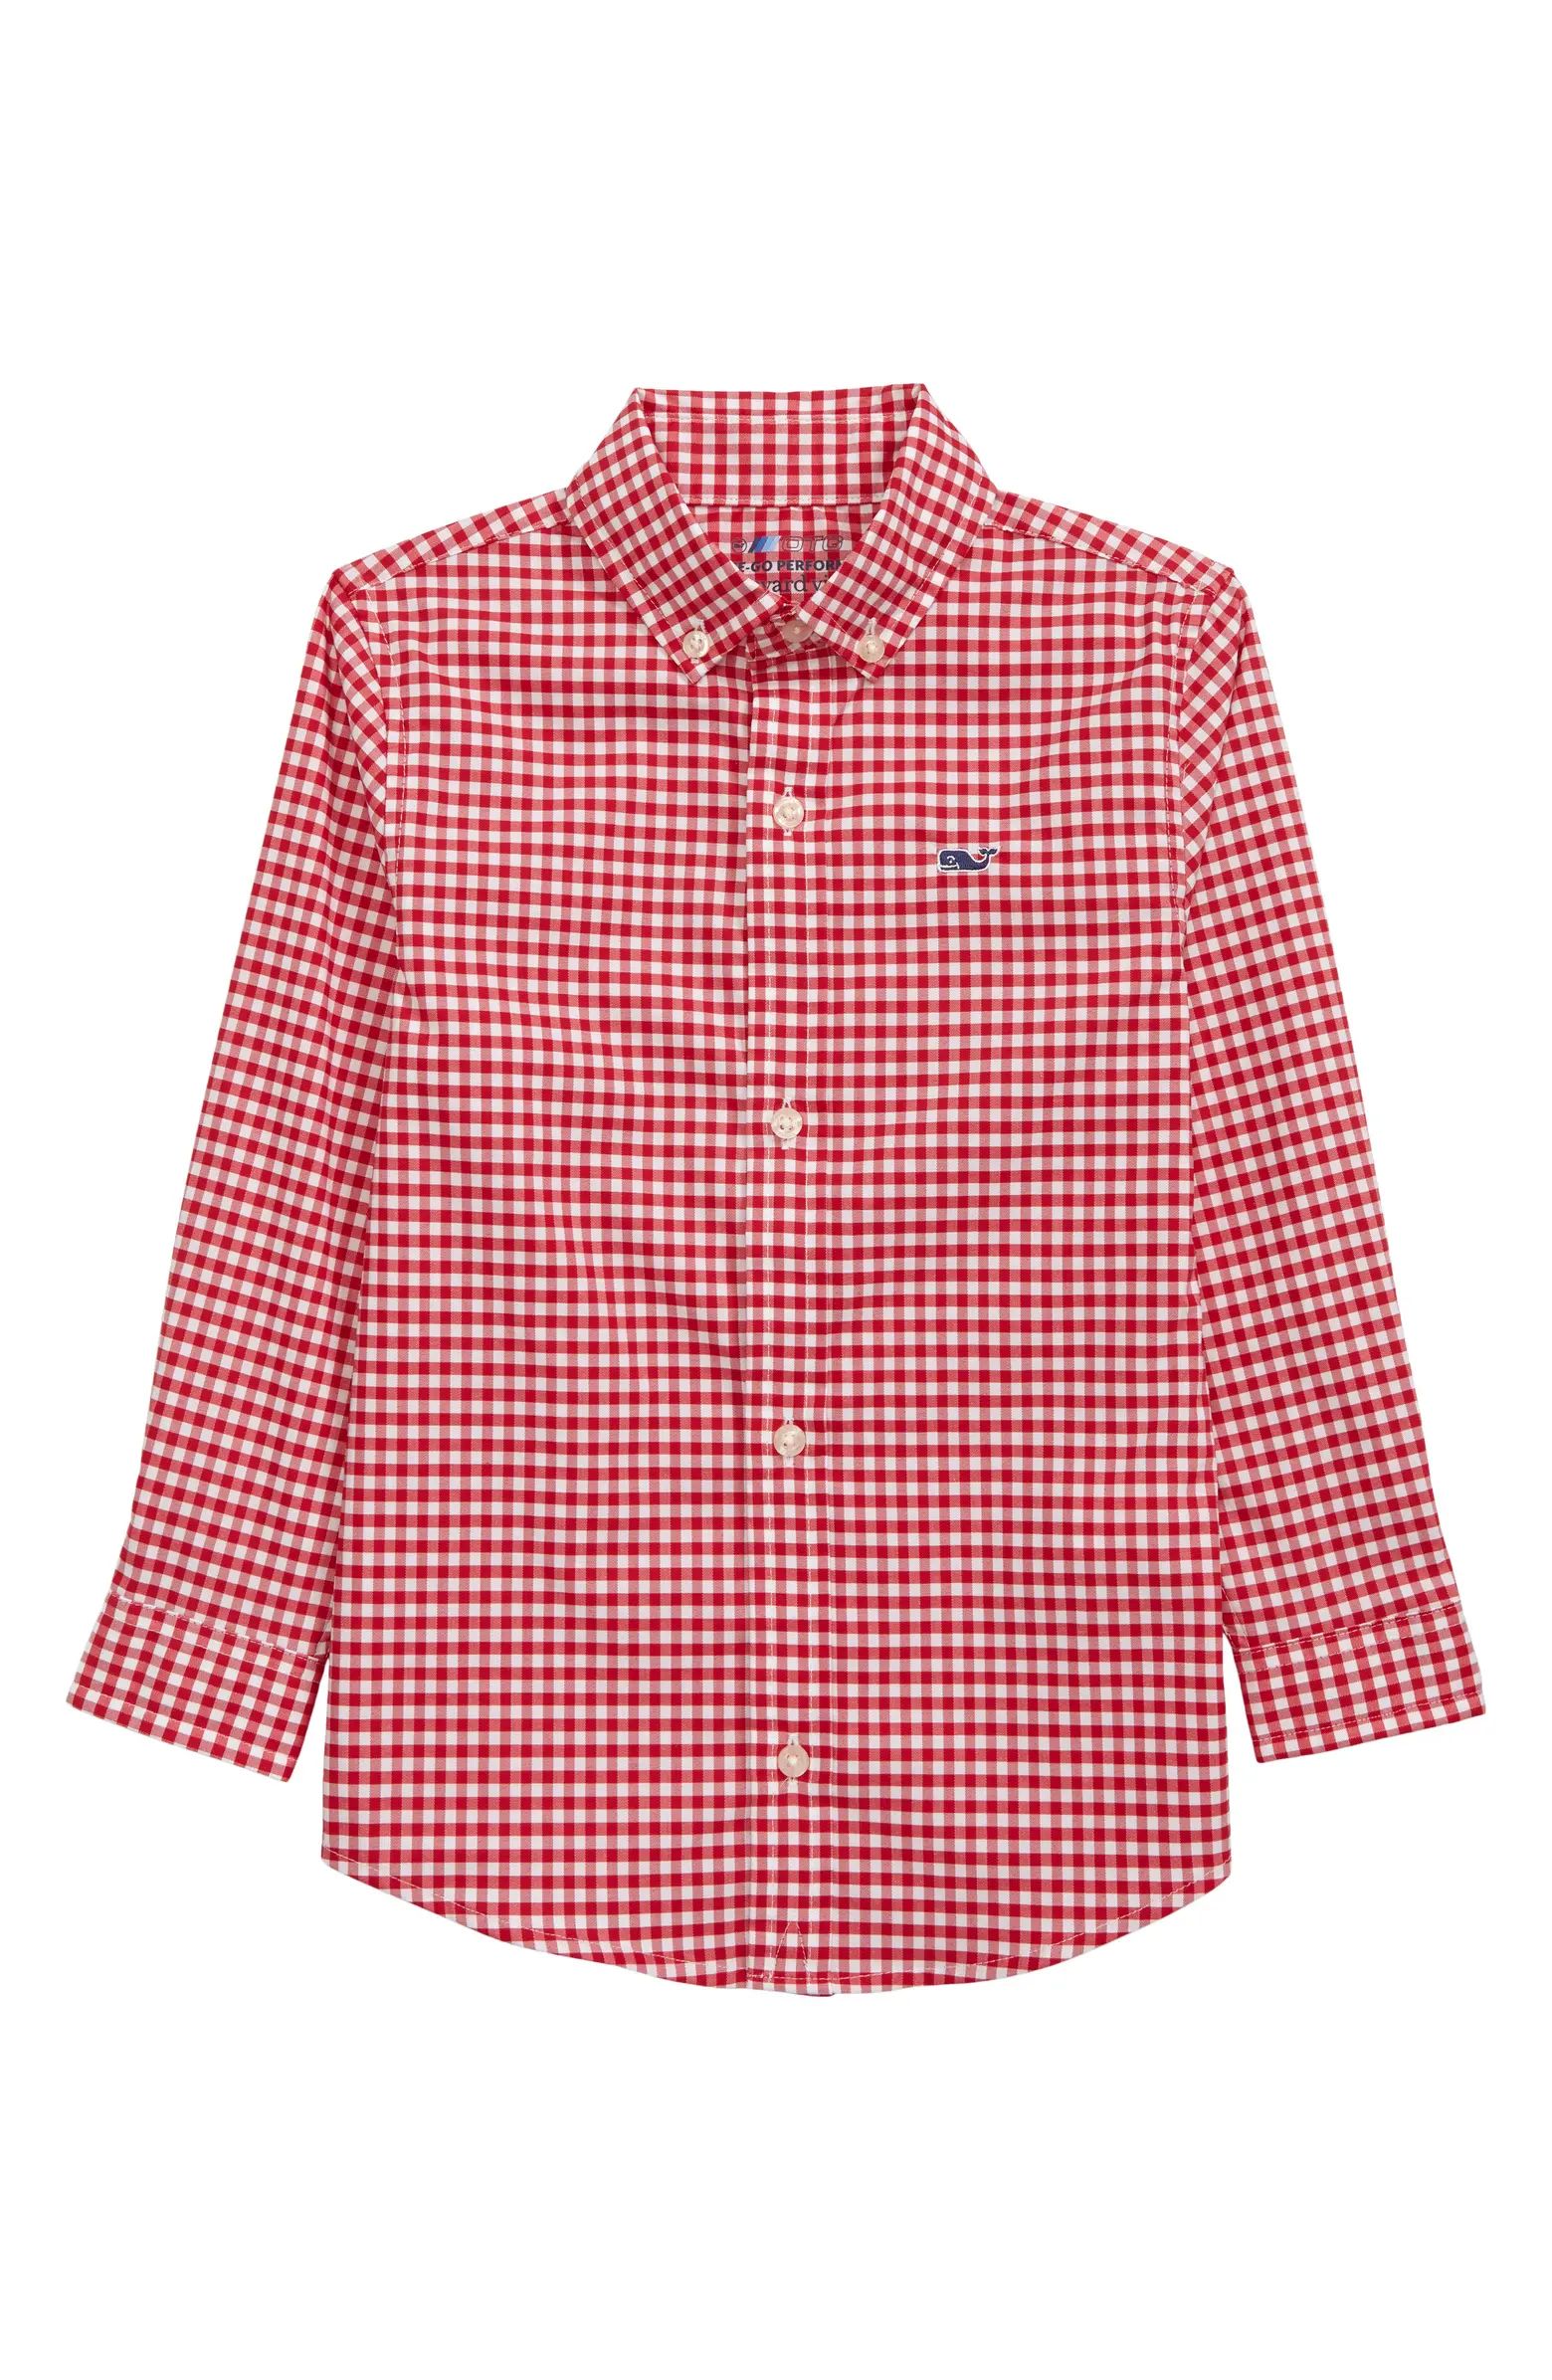 Kids' Gingham Performance Whale Button-Down Shirt | Nordstrom